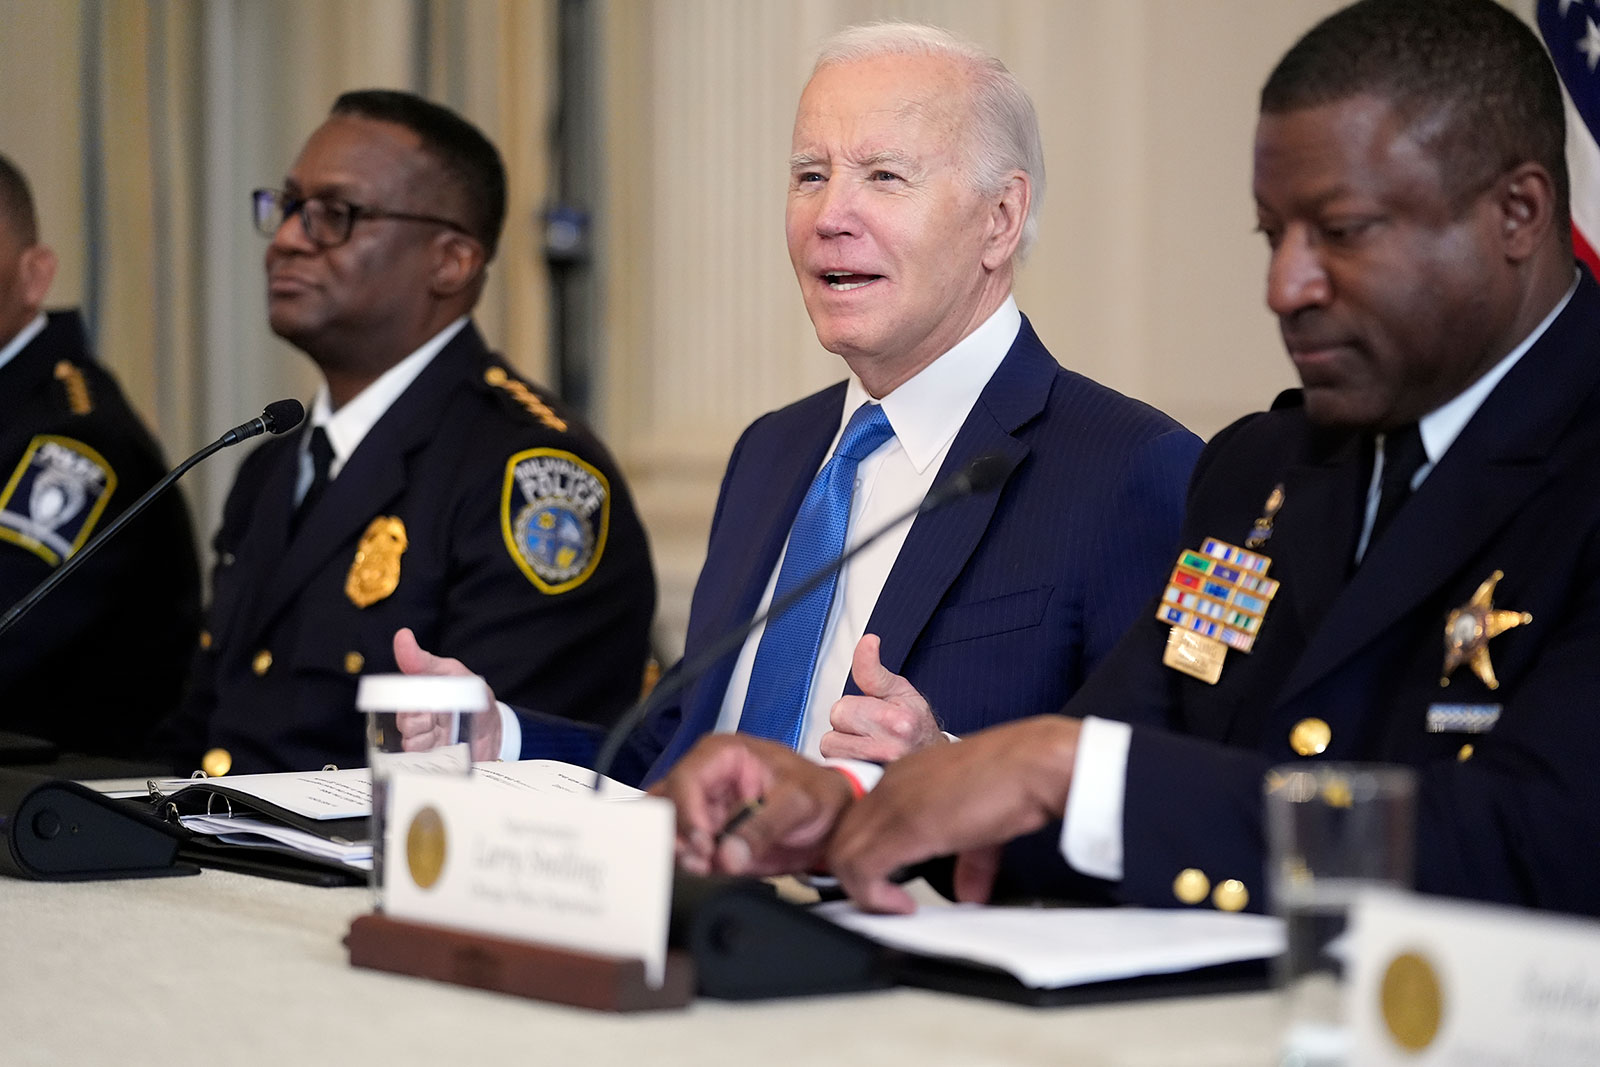 President Joe Biden meets with law enforcement officials in the State Dining Room of the White House in Washington, DC, on  Wednesday, February 28.